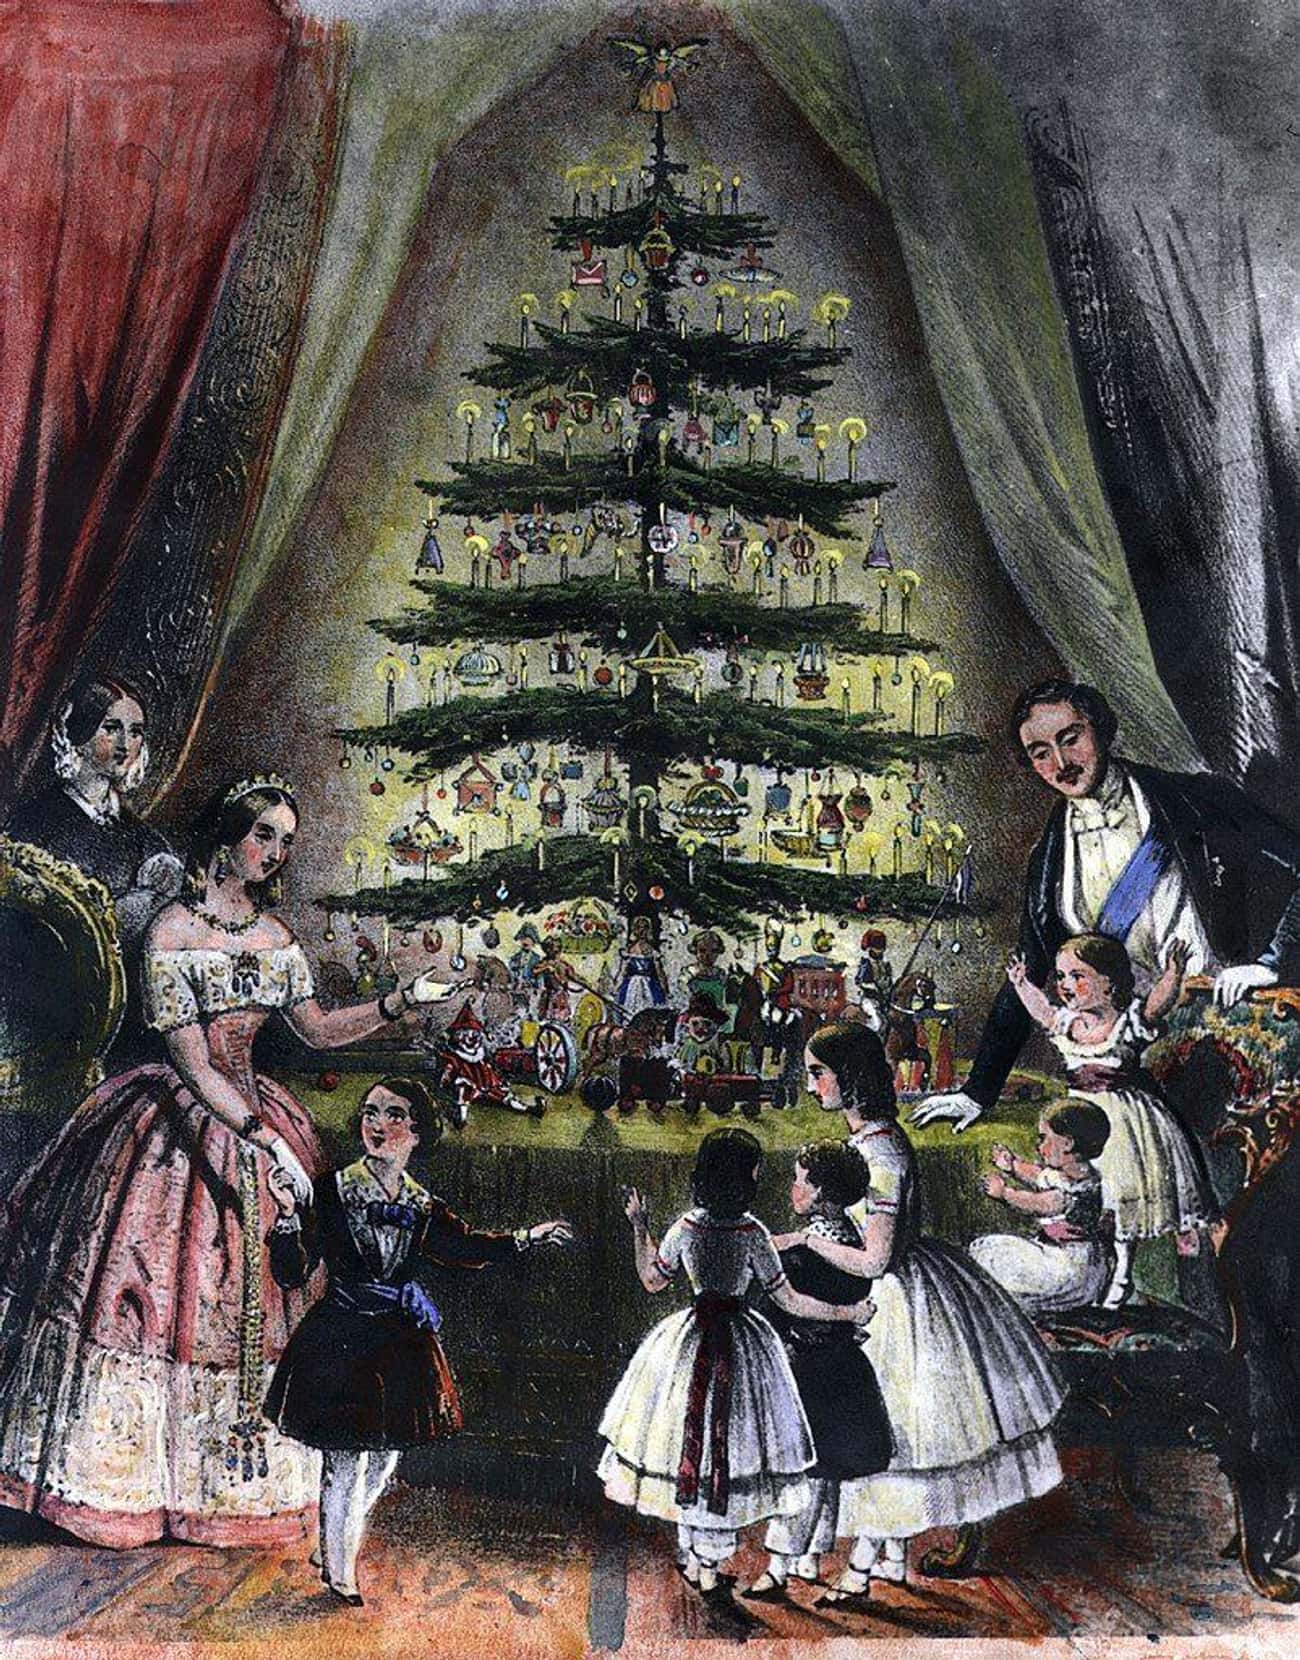 Christmas Trees Have Always Been Part of Christmas